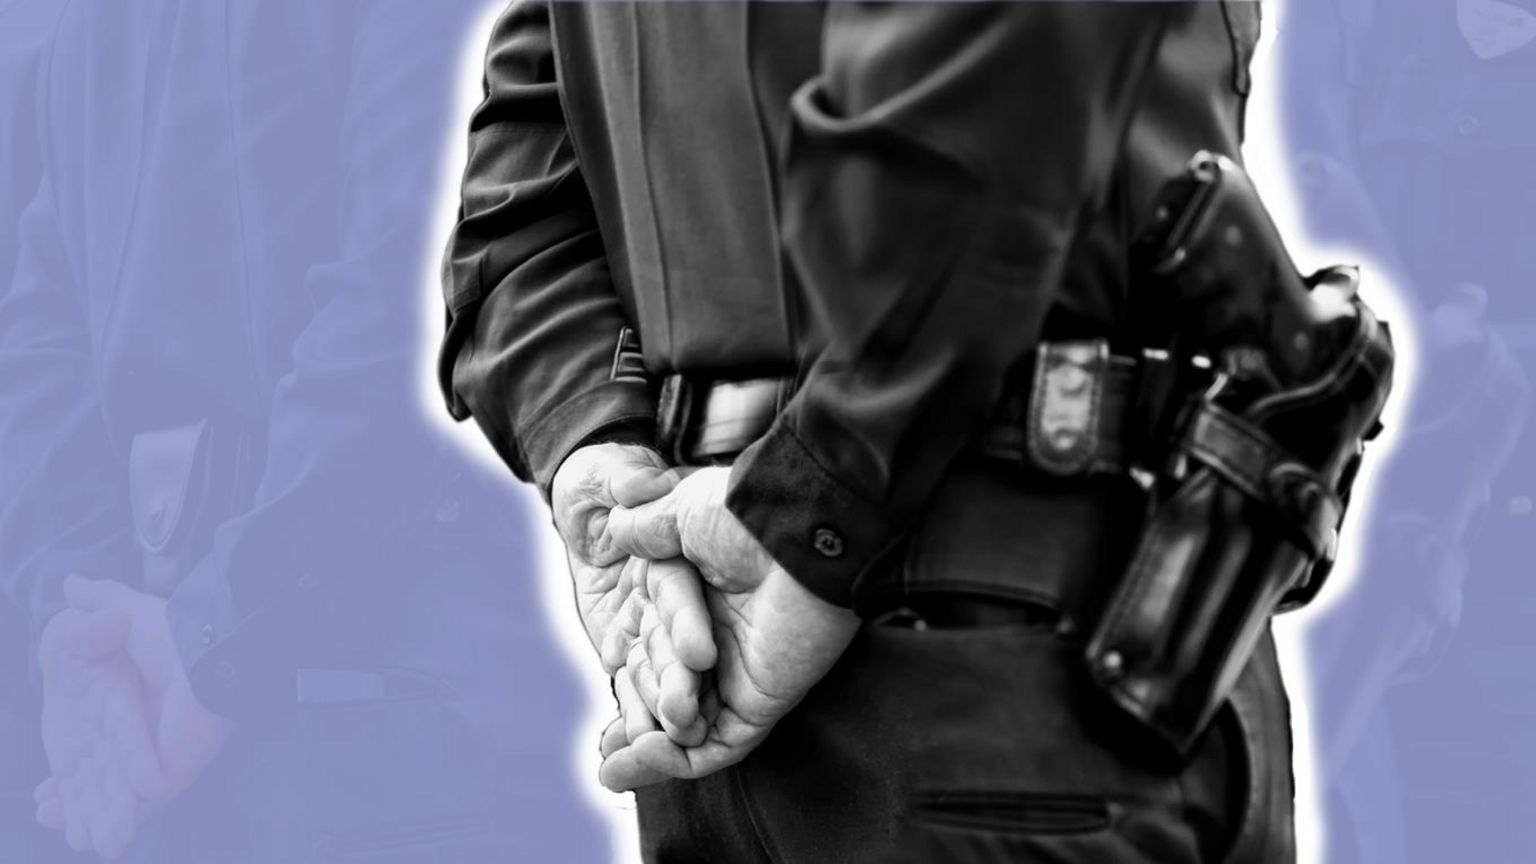 Police officer with hands clasped behind his back